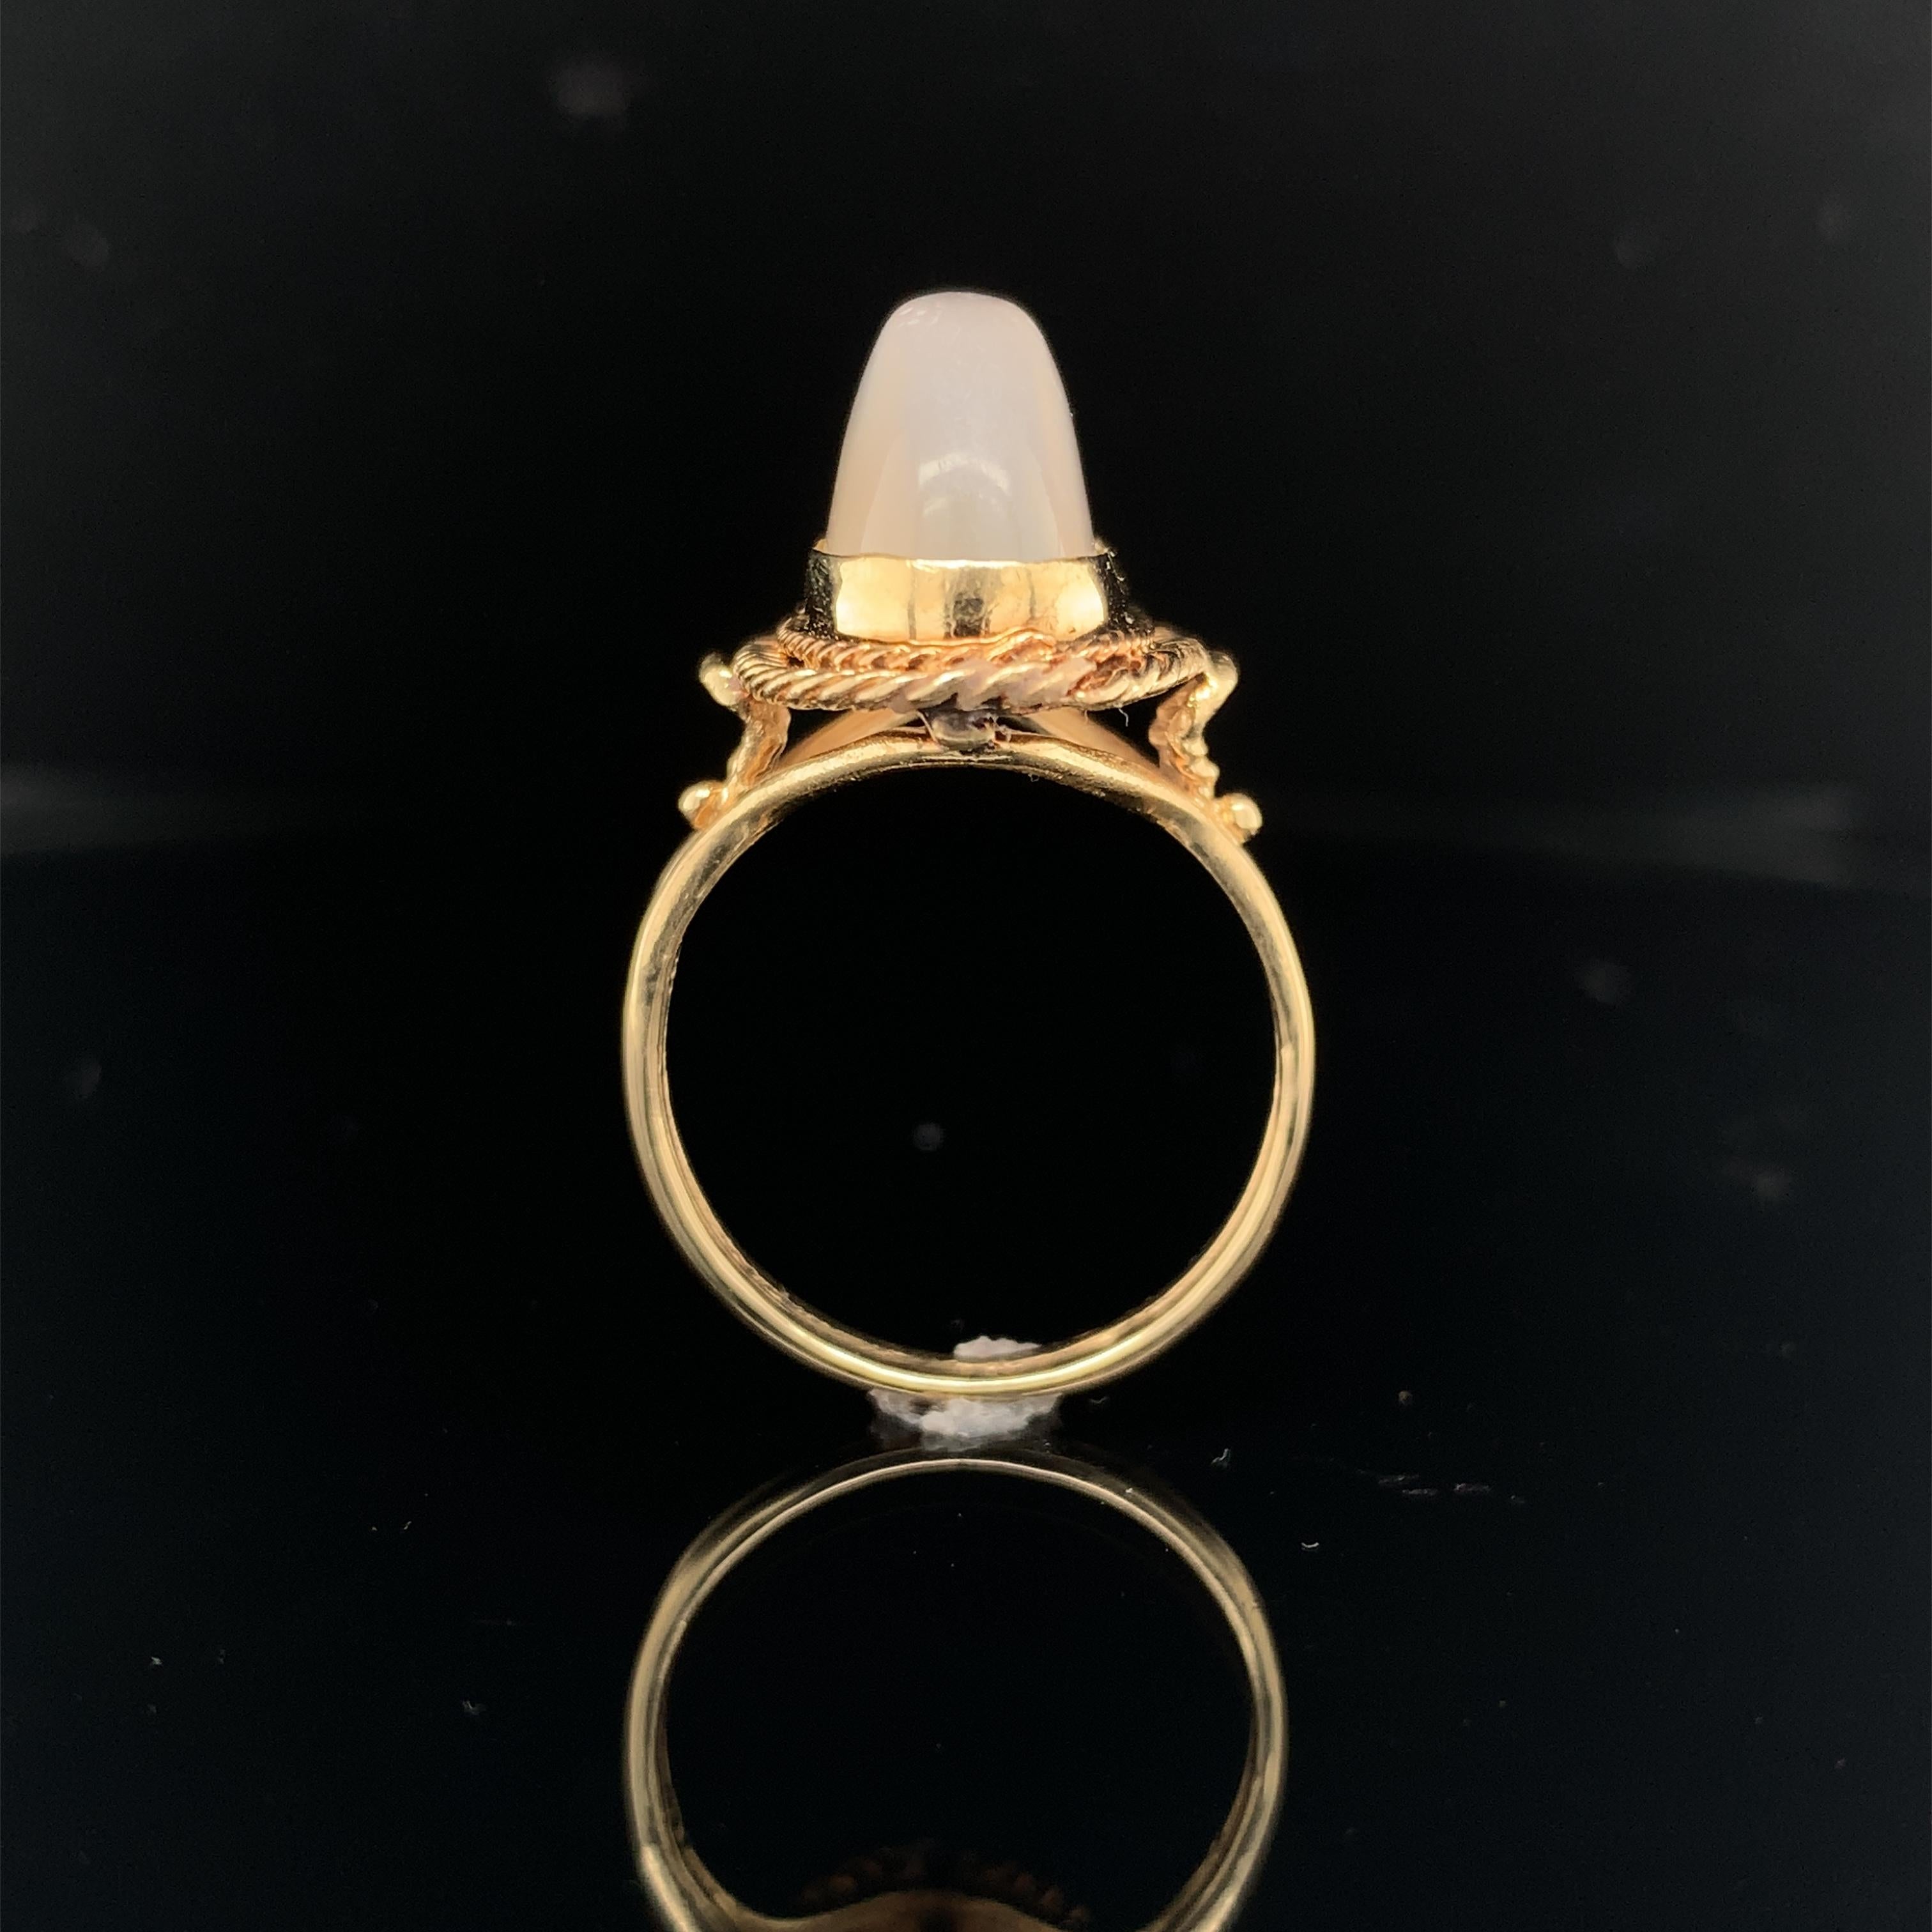 14k yellow gold ring featuring a large high dome oval moonstone.  The moonstone is a long oval bezel set in a hand wrought looped wire frame and wirework setting. The moonstone has white 